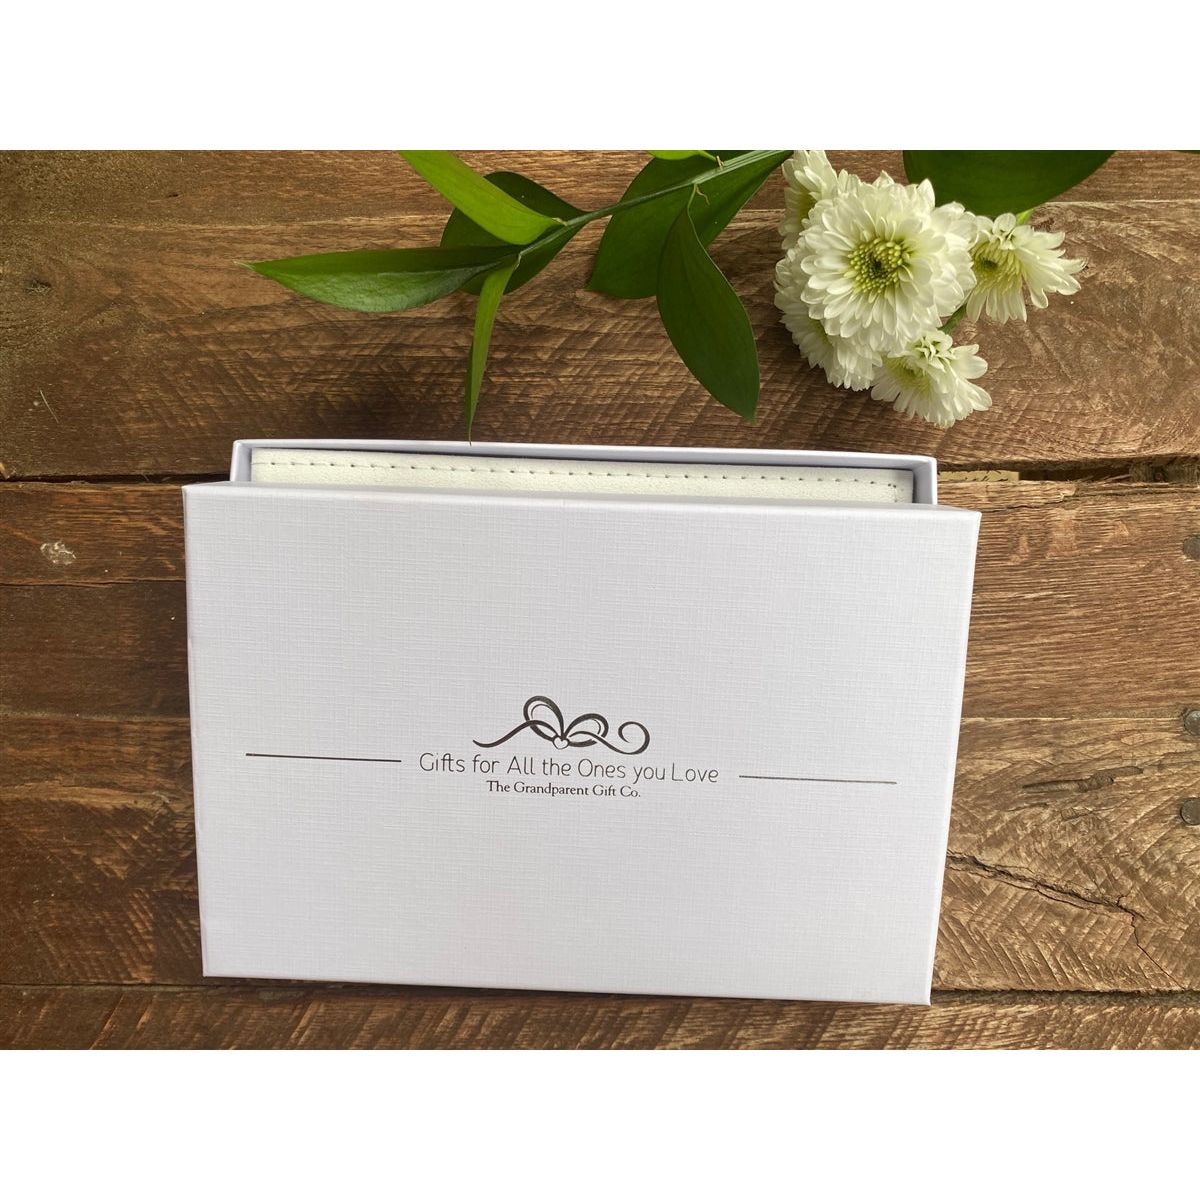 High quality white box with linen finish.